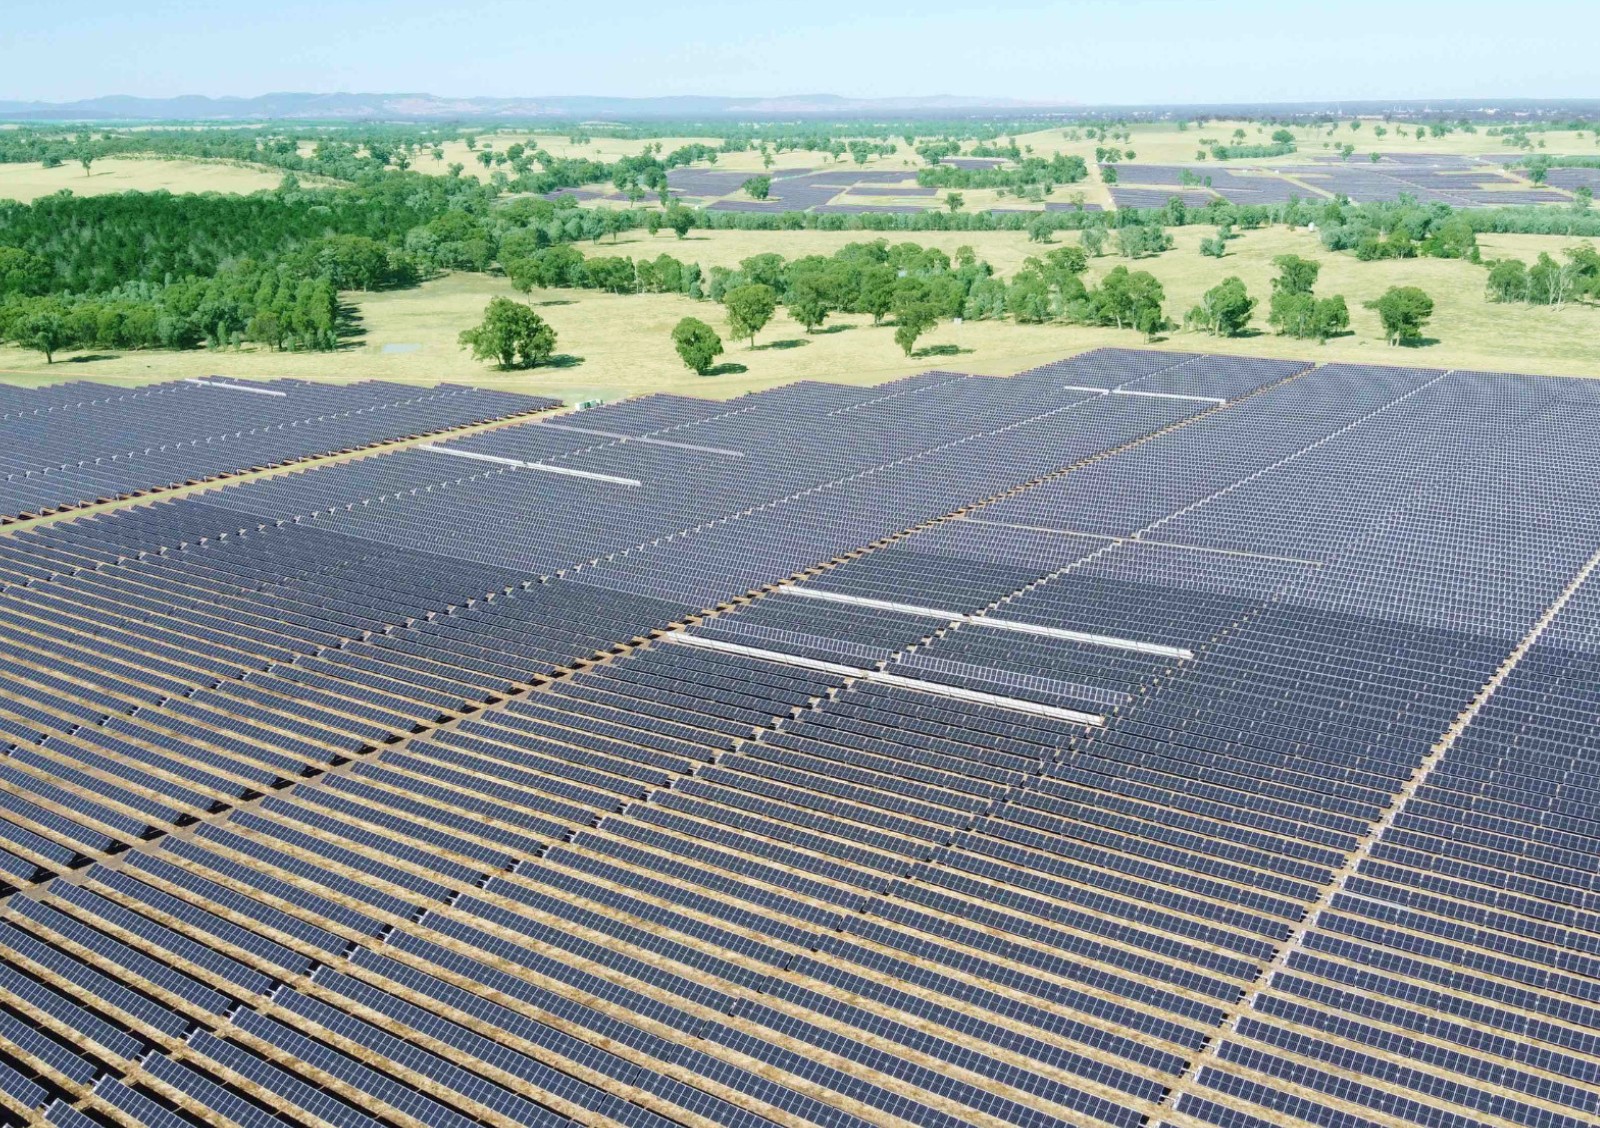 GLENROWAN – THE LARGEST PHOTOVOLTAIC PLANT FROM WIRTGEN INVEST SUCCESSFULLY CONNECTED IN AUSTRALIA.